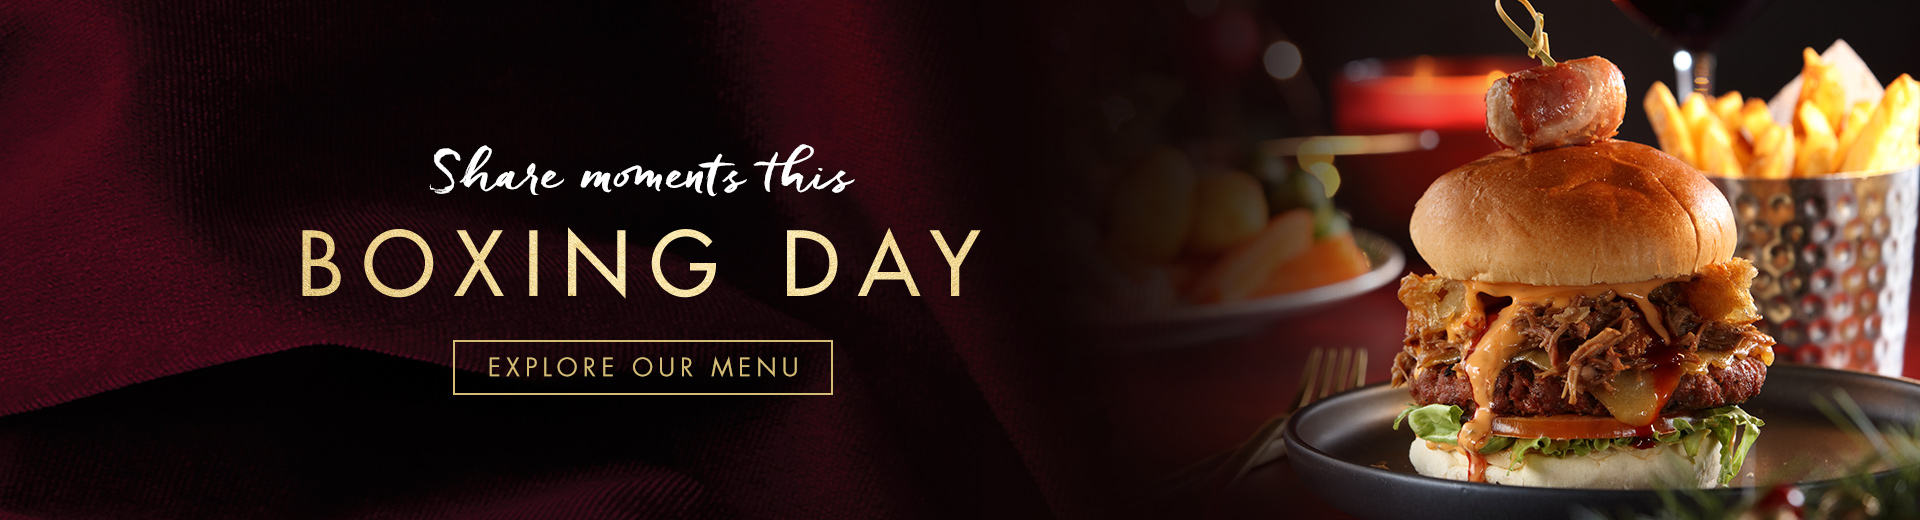 BOXING DAY MENU AT [outlet]